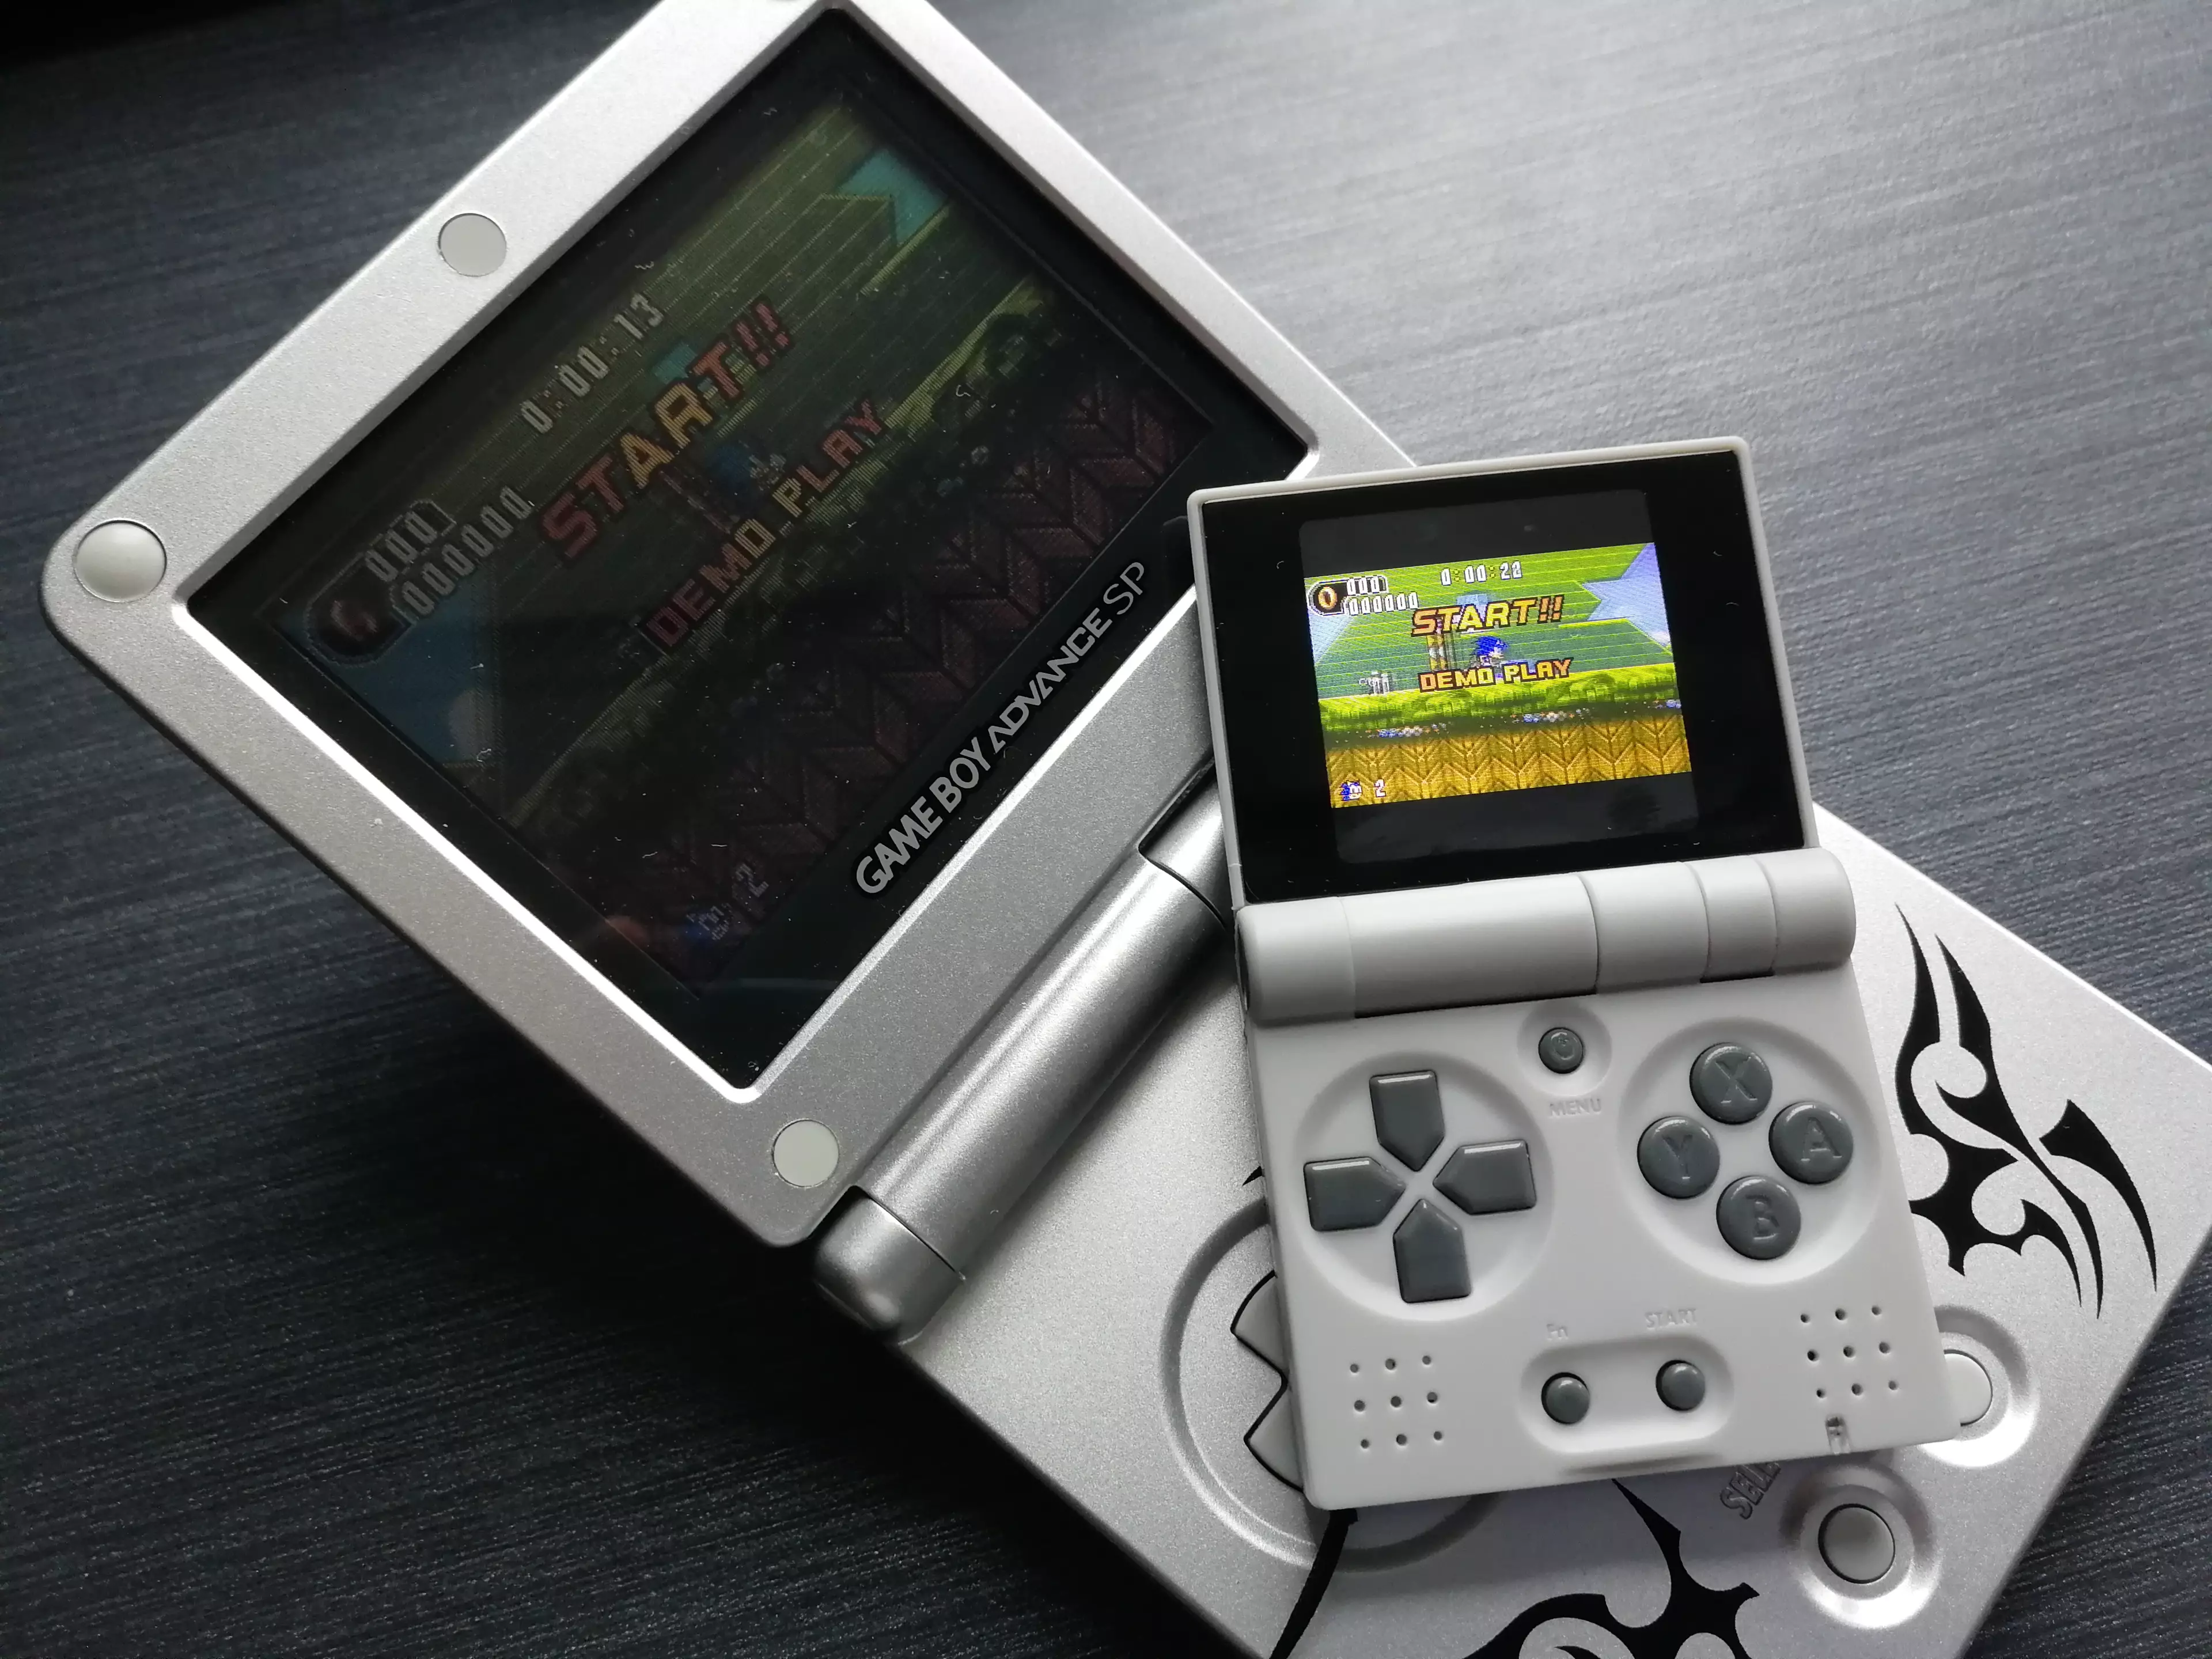 The FunKey S beside its closest influence, the Game Boy Advance SP /